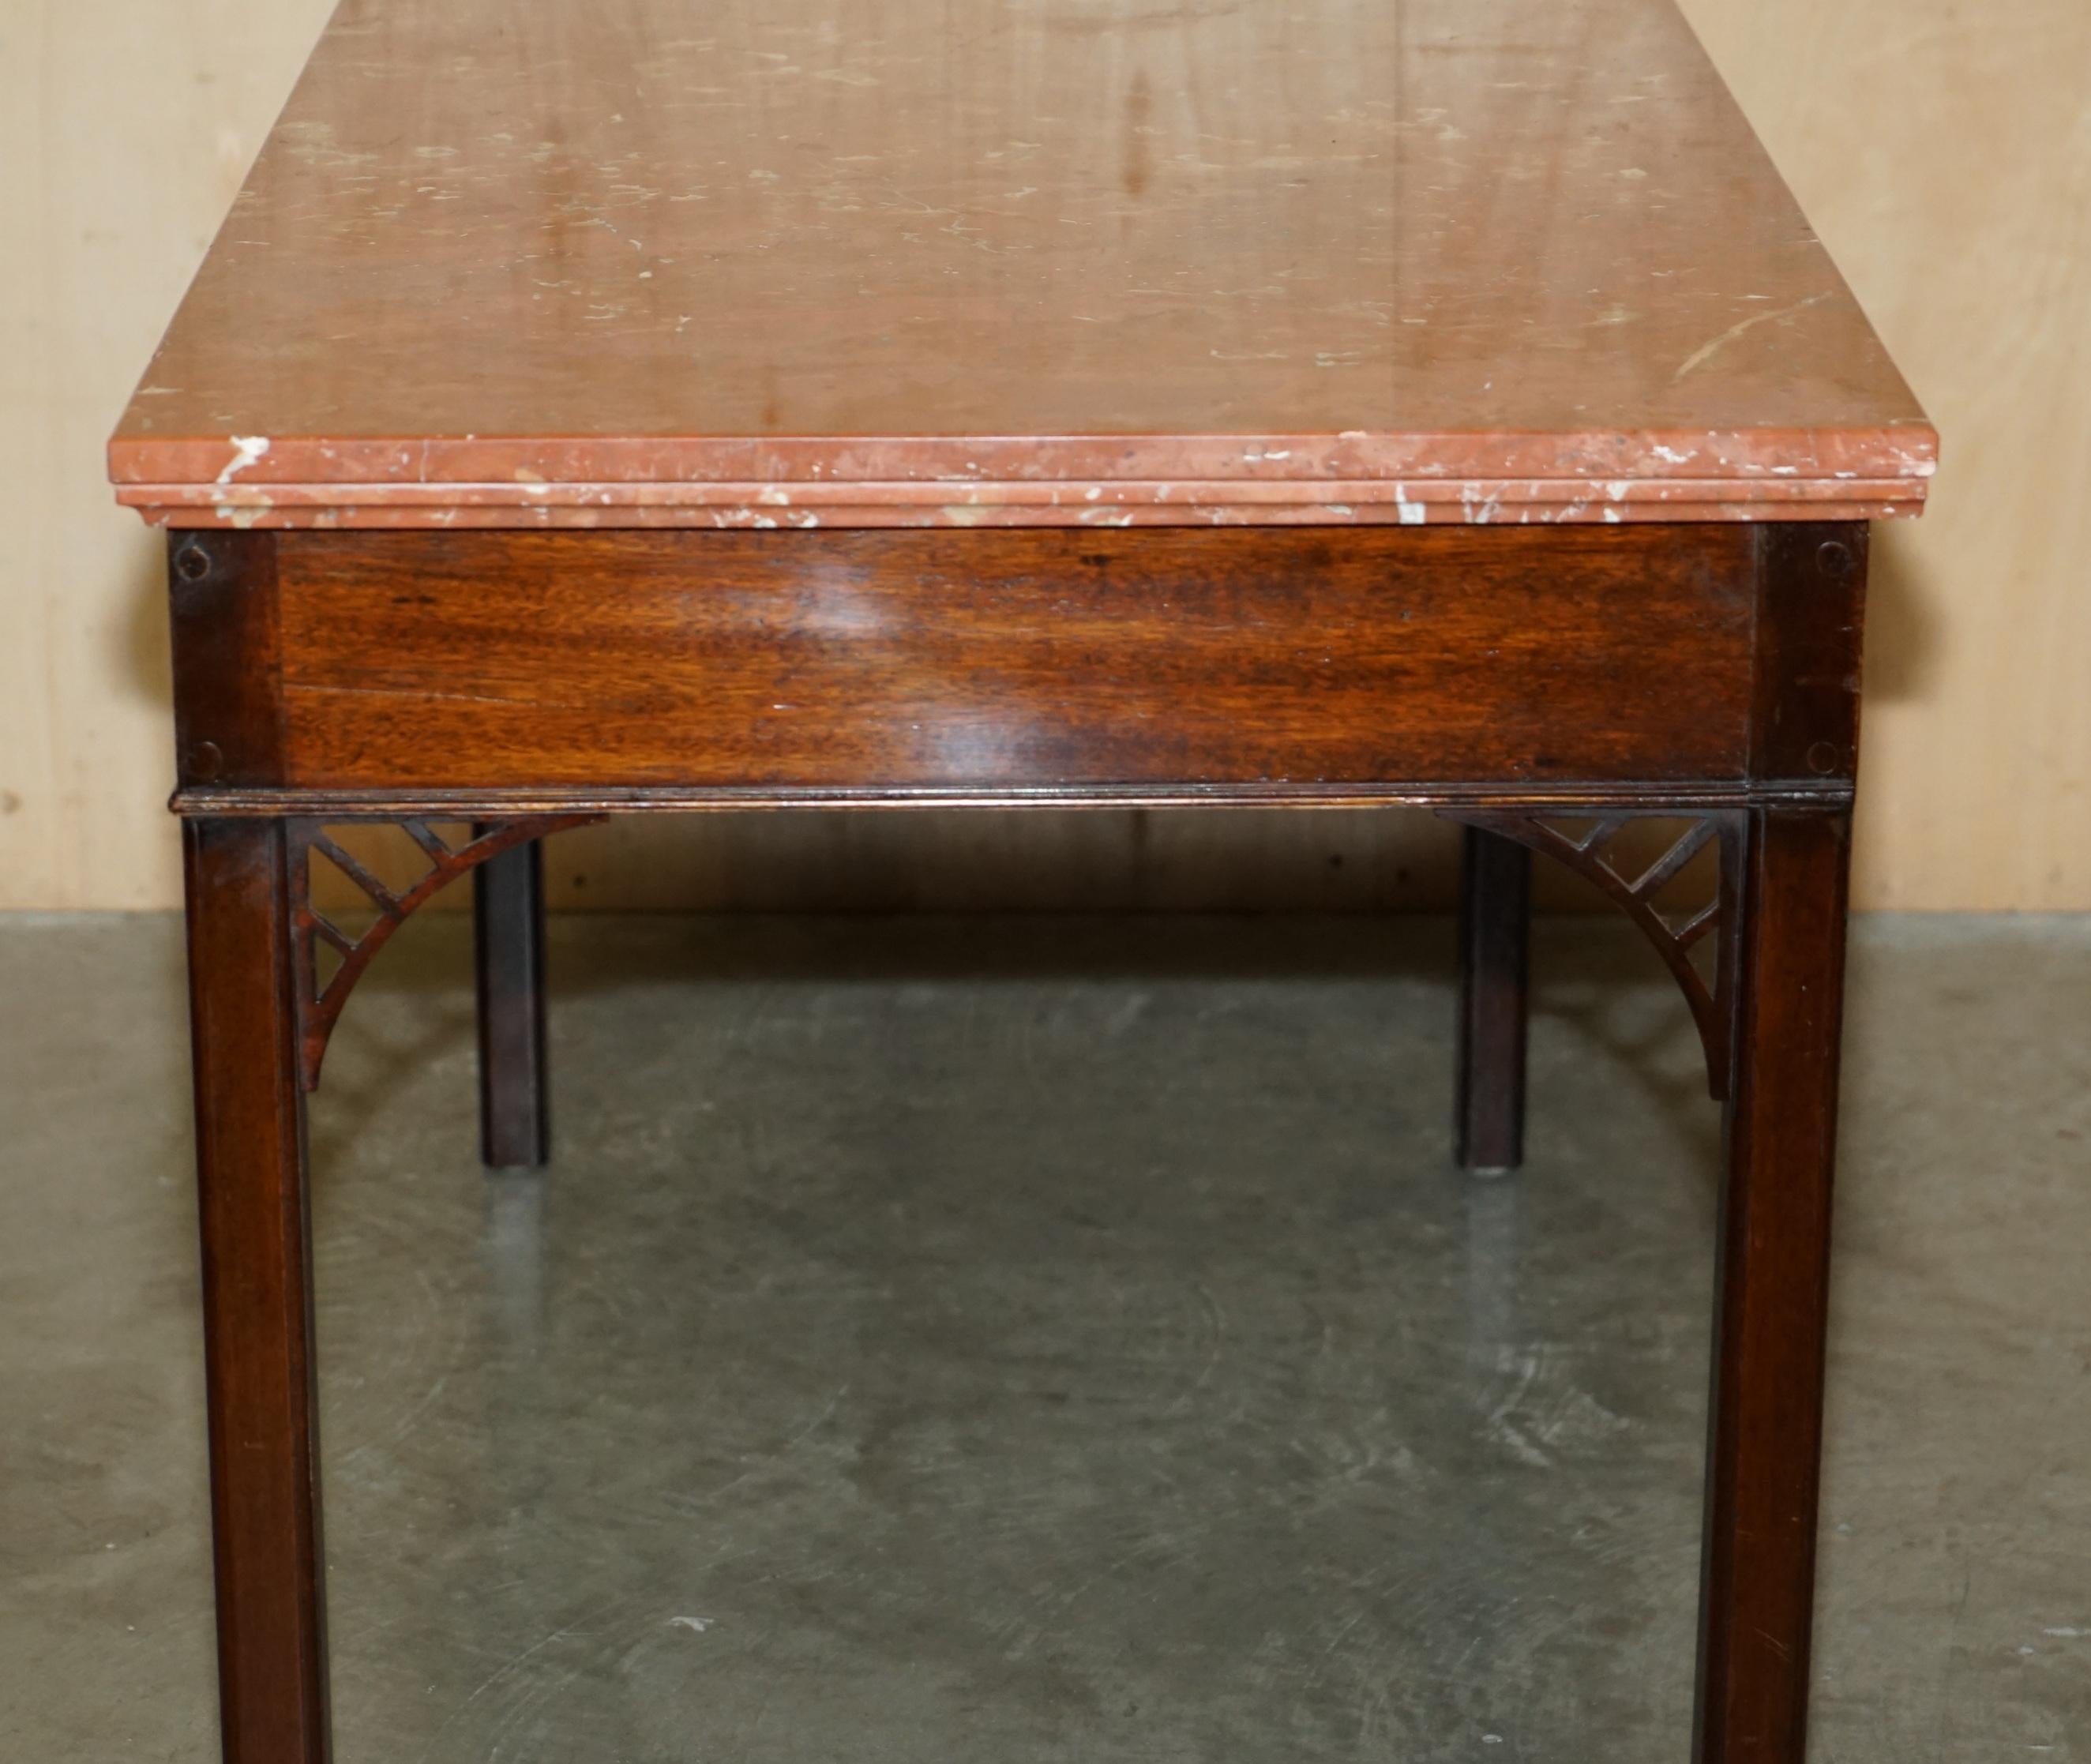 ANTIQUE CIRCA 1860 LARGE THOMAS CHIPPENDALE MARBLE TOP WRiTING OR HALL TABLE im Angebot 11